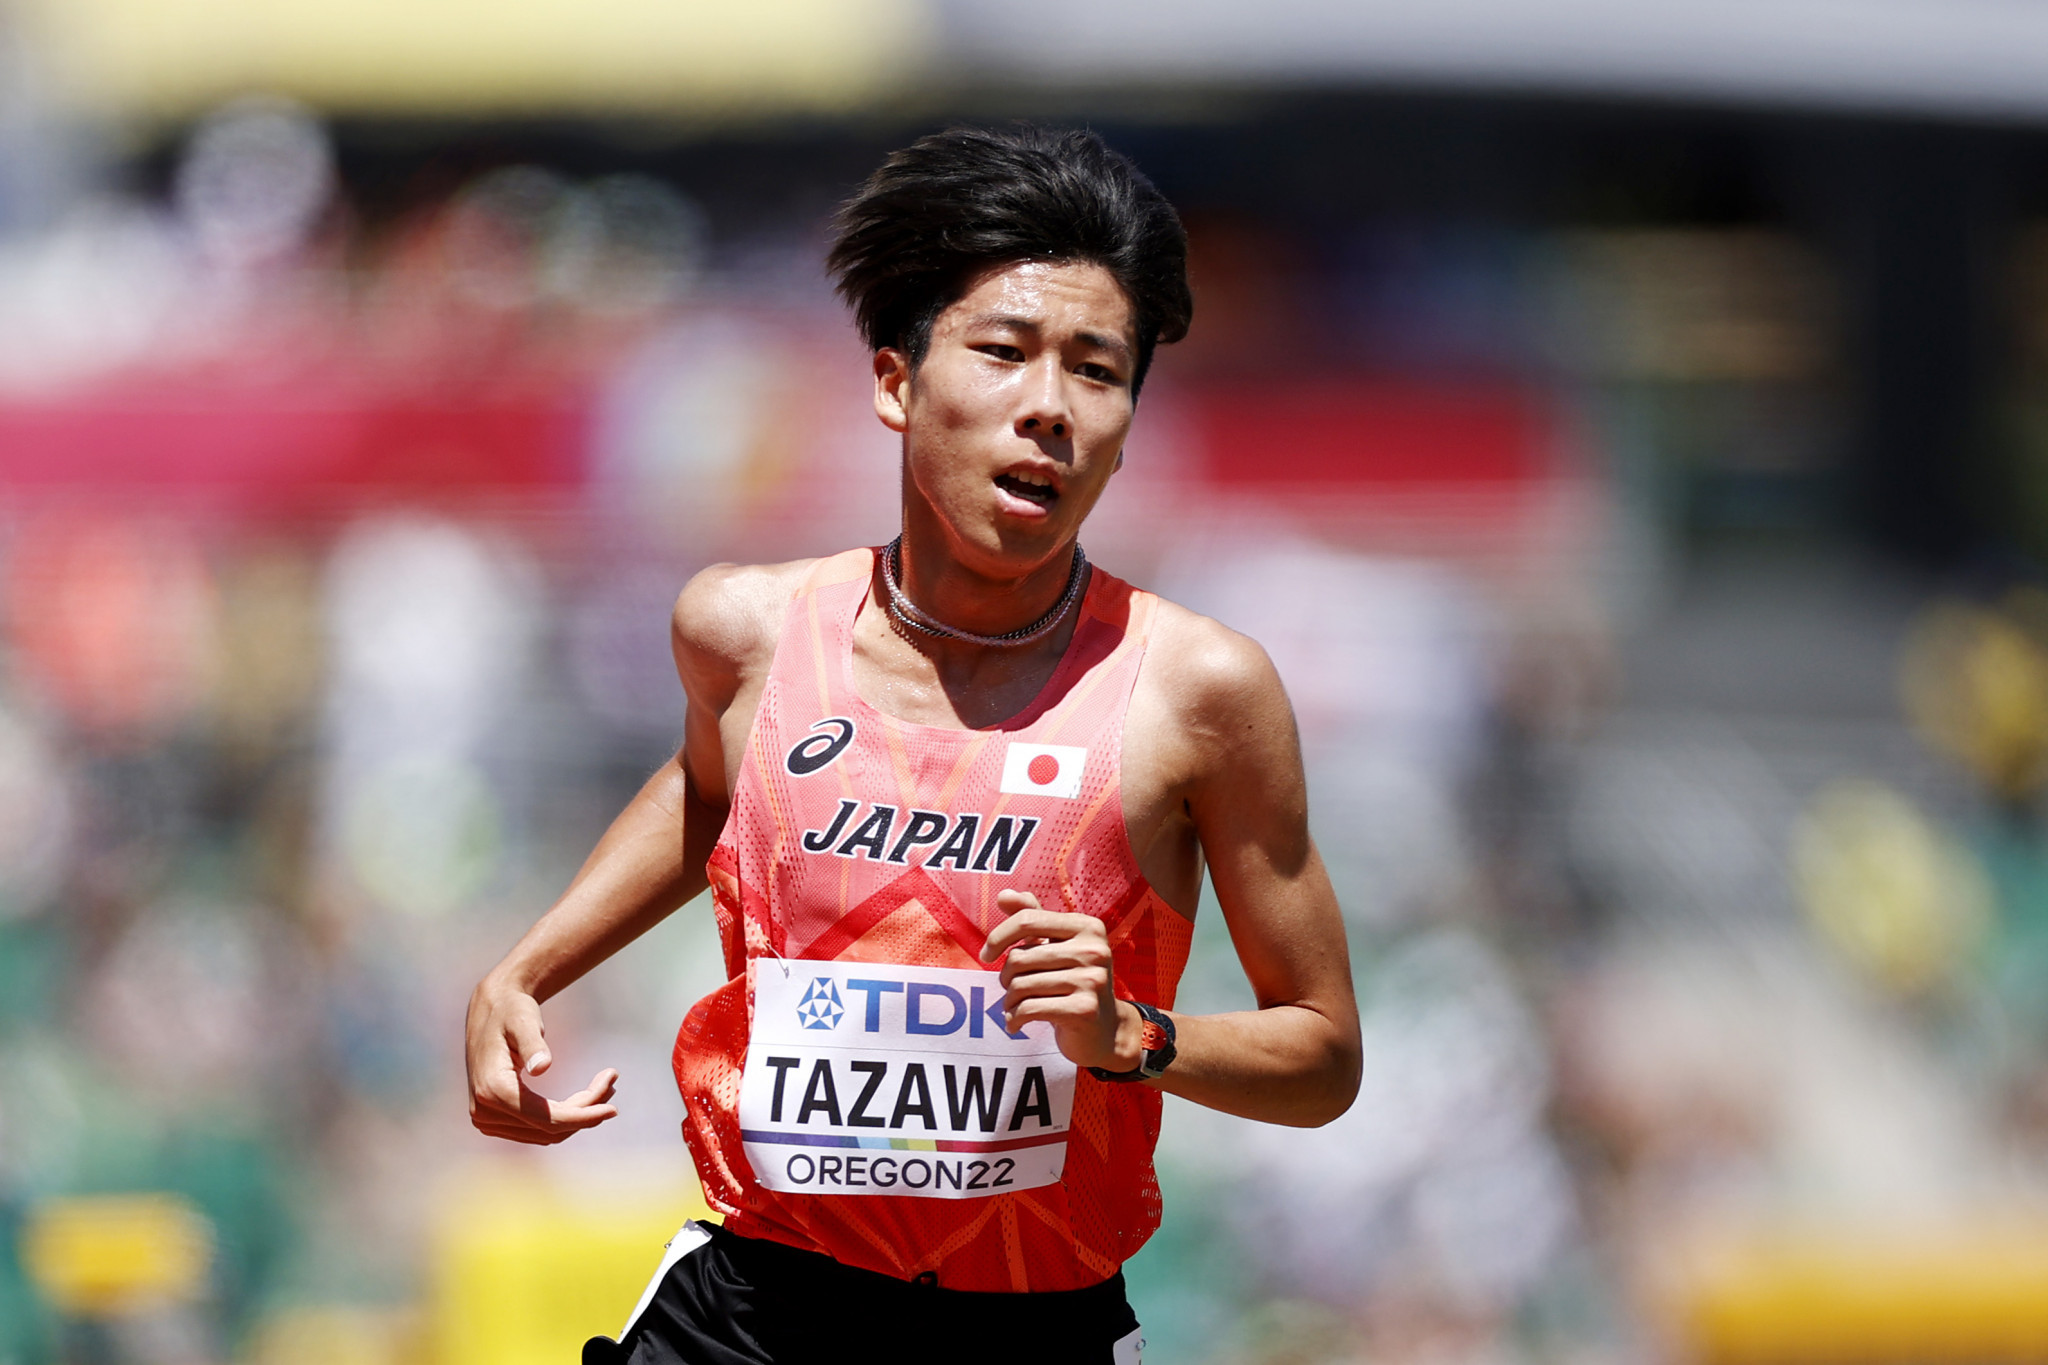 Japan's Ren Tazawa set the seal on a successful opening day of the Asian Championships with gold in the 10,000 metres ©Getty Images